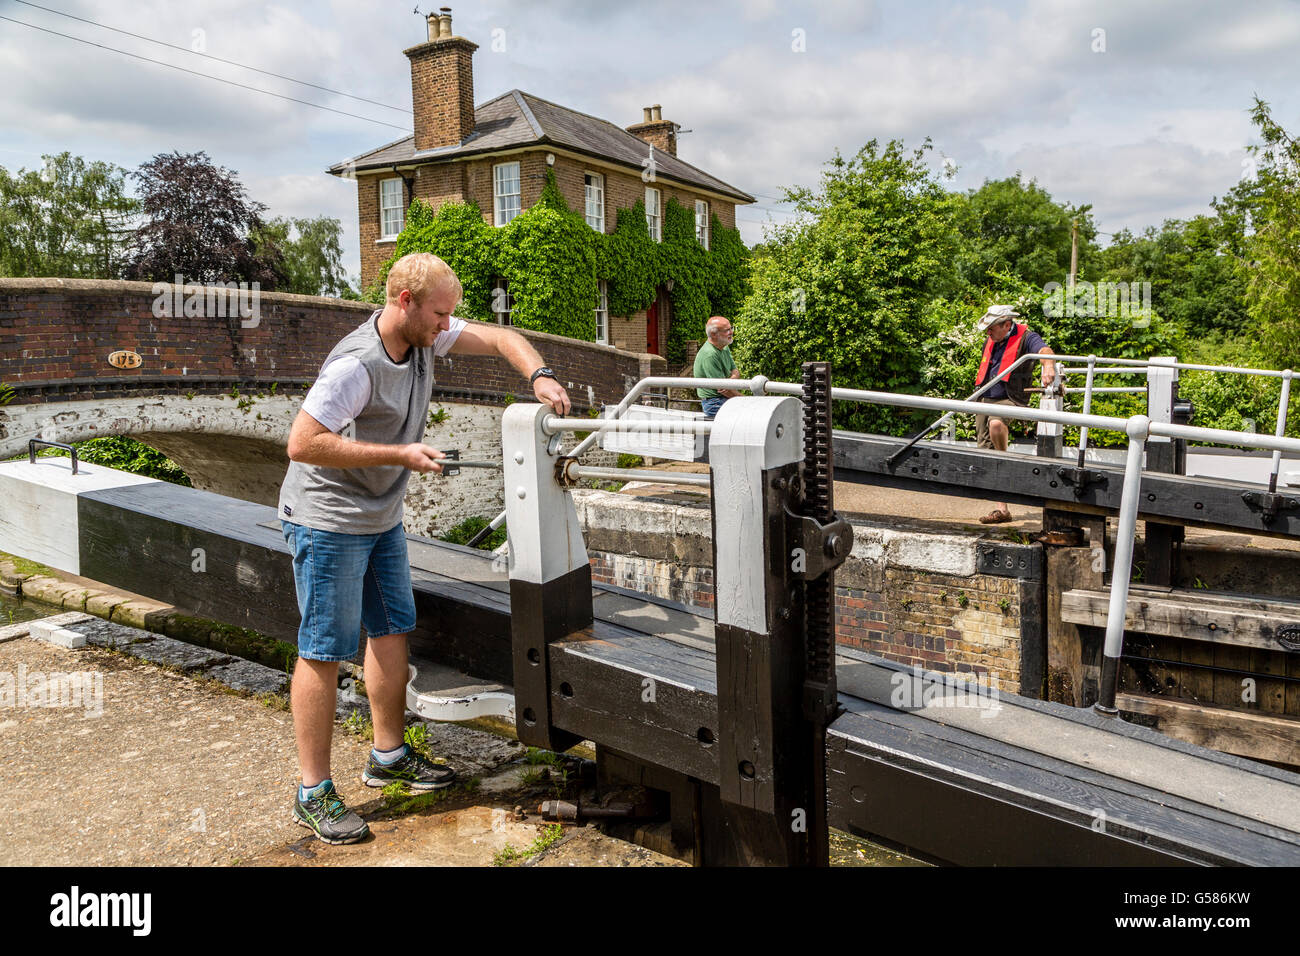 Closing the paddle gate at Stockers Lock Grand Union Canal London England UK Stock Photo